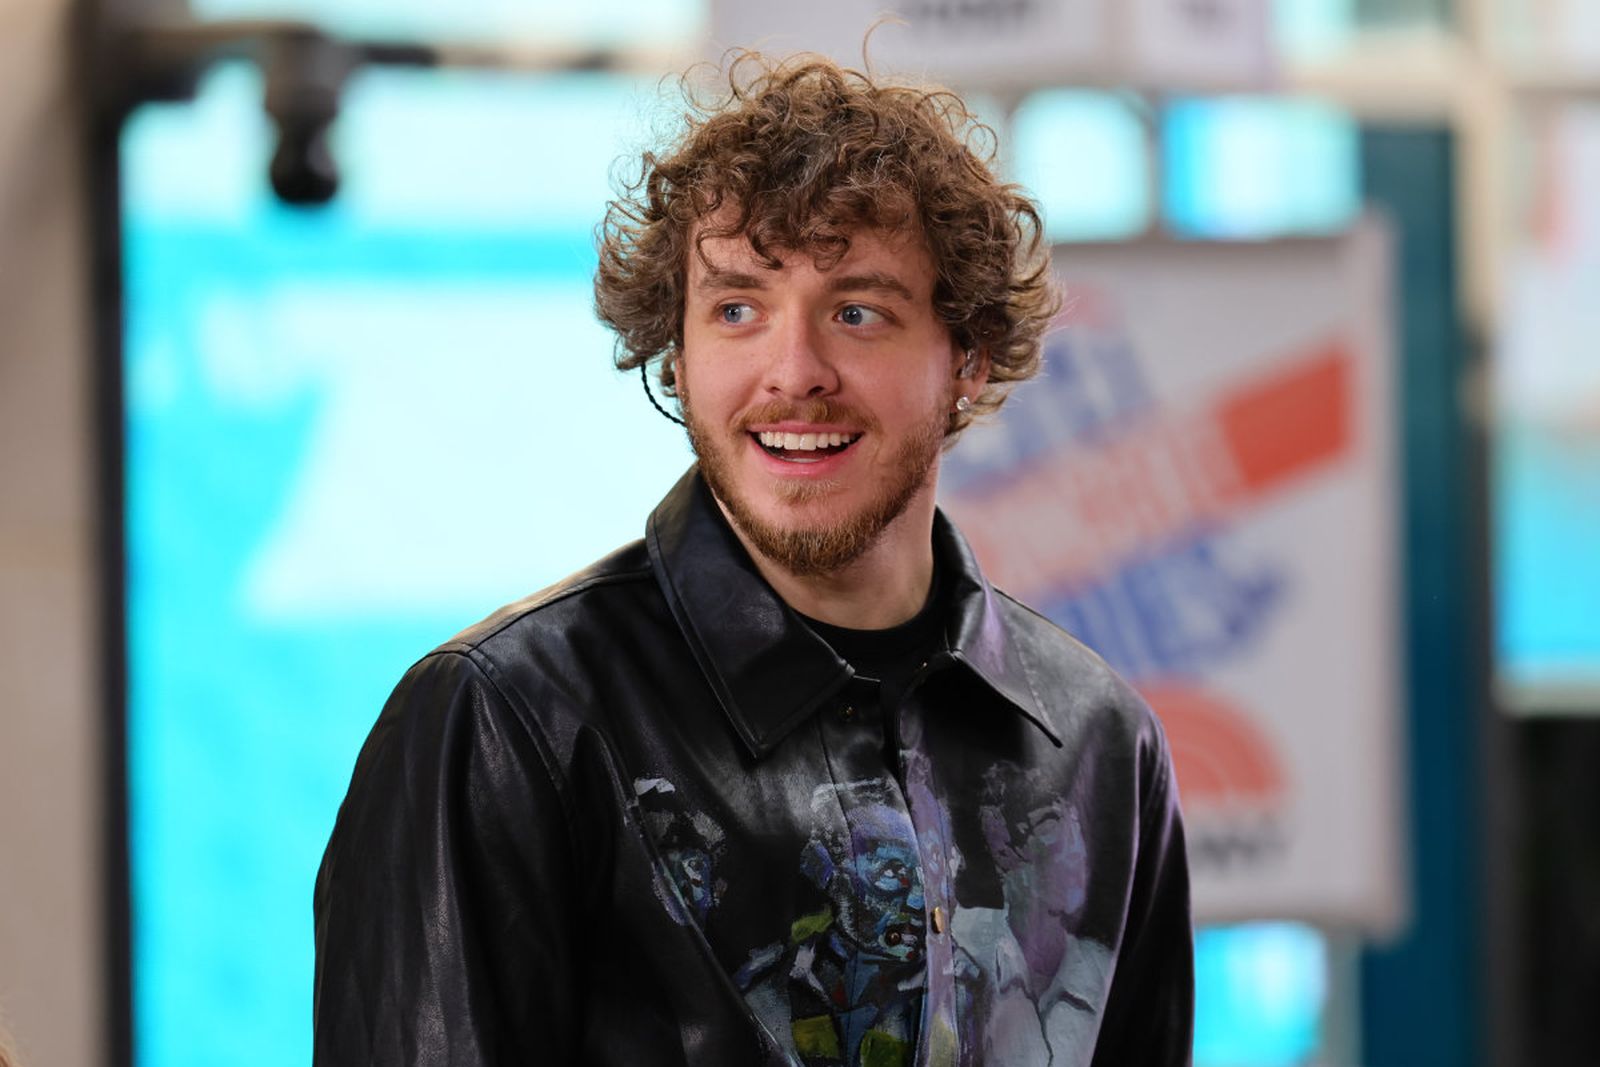 Jack Harlow Performs On NBC's "Today"